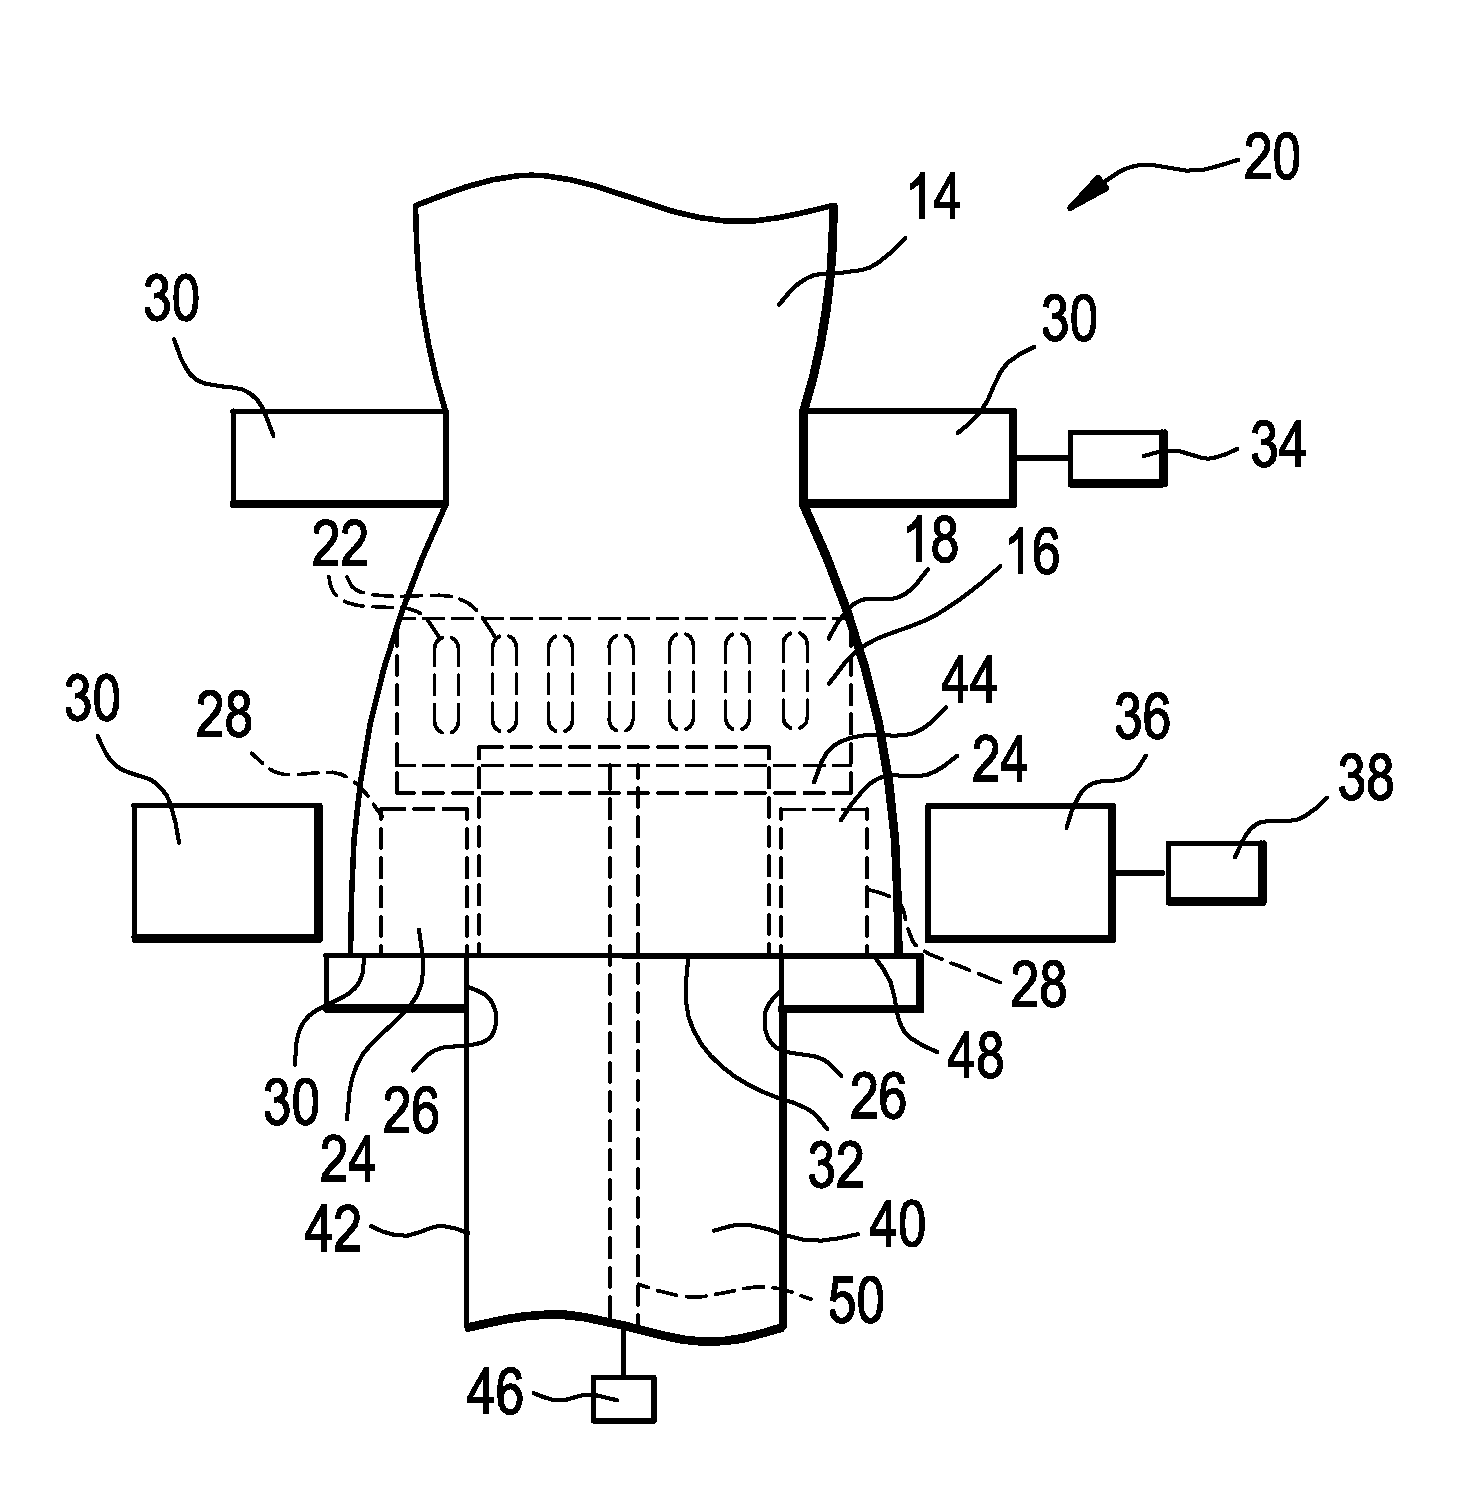 Method and appratus for insertion of an Anti-siphon grid into a hose